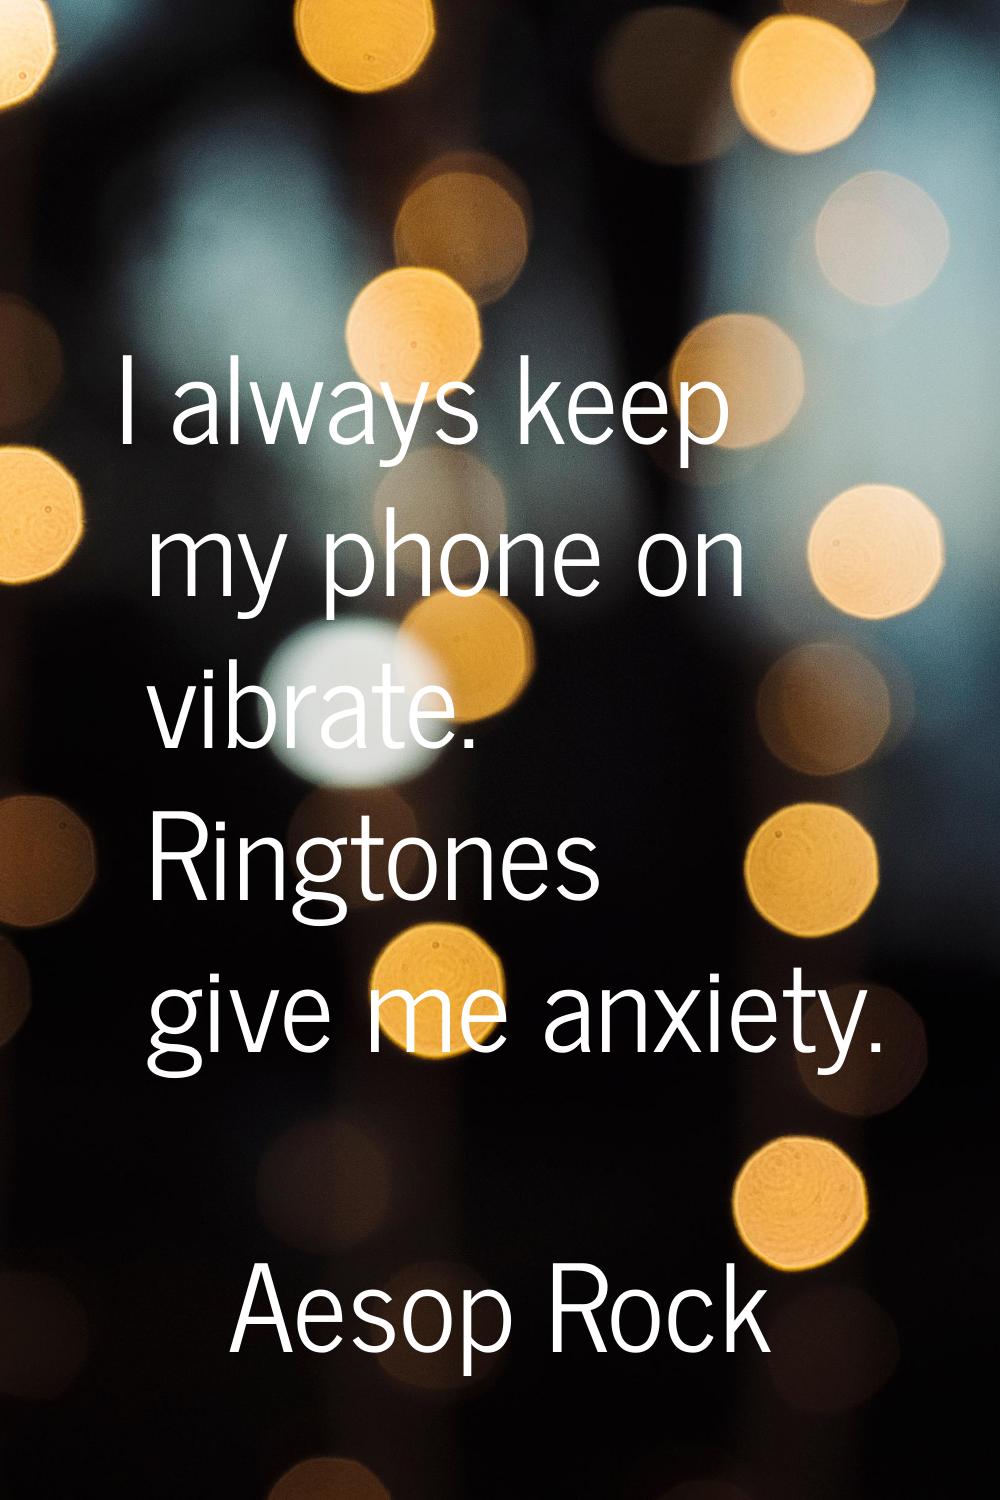 I always keep my phone on vibrate. Ringtones give me anxiety.